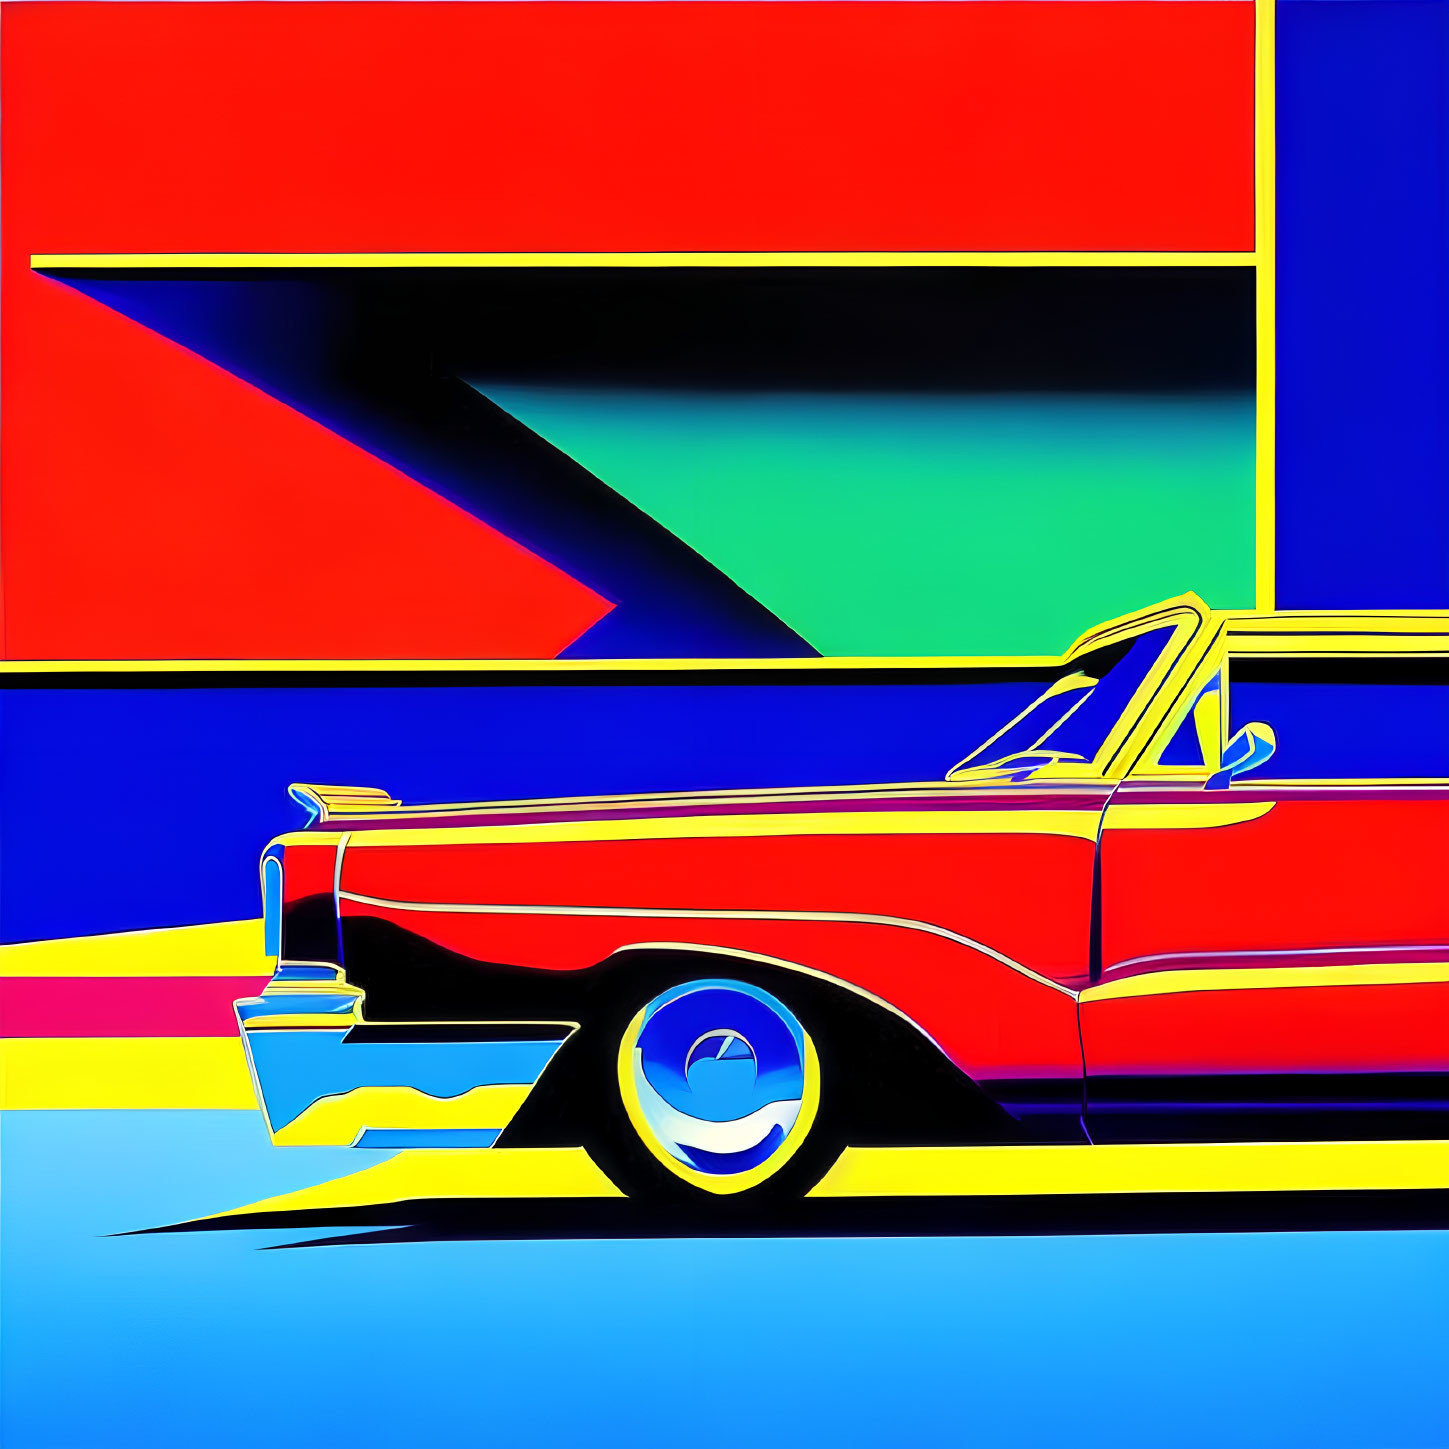 Colorful Stylized Red and Black Car Artwork with Geometric Background